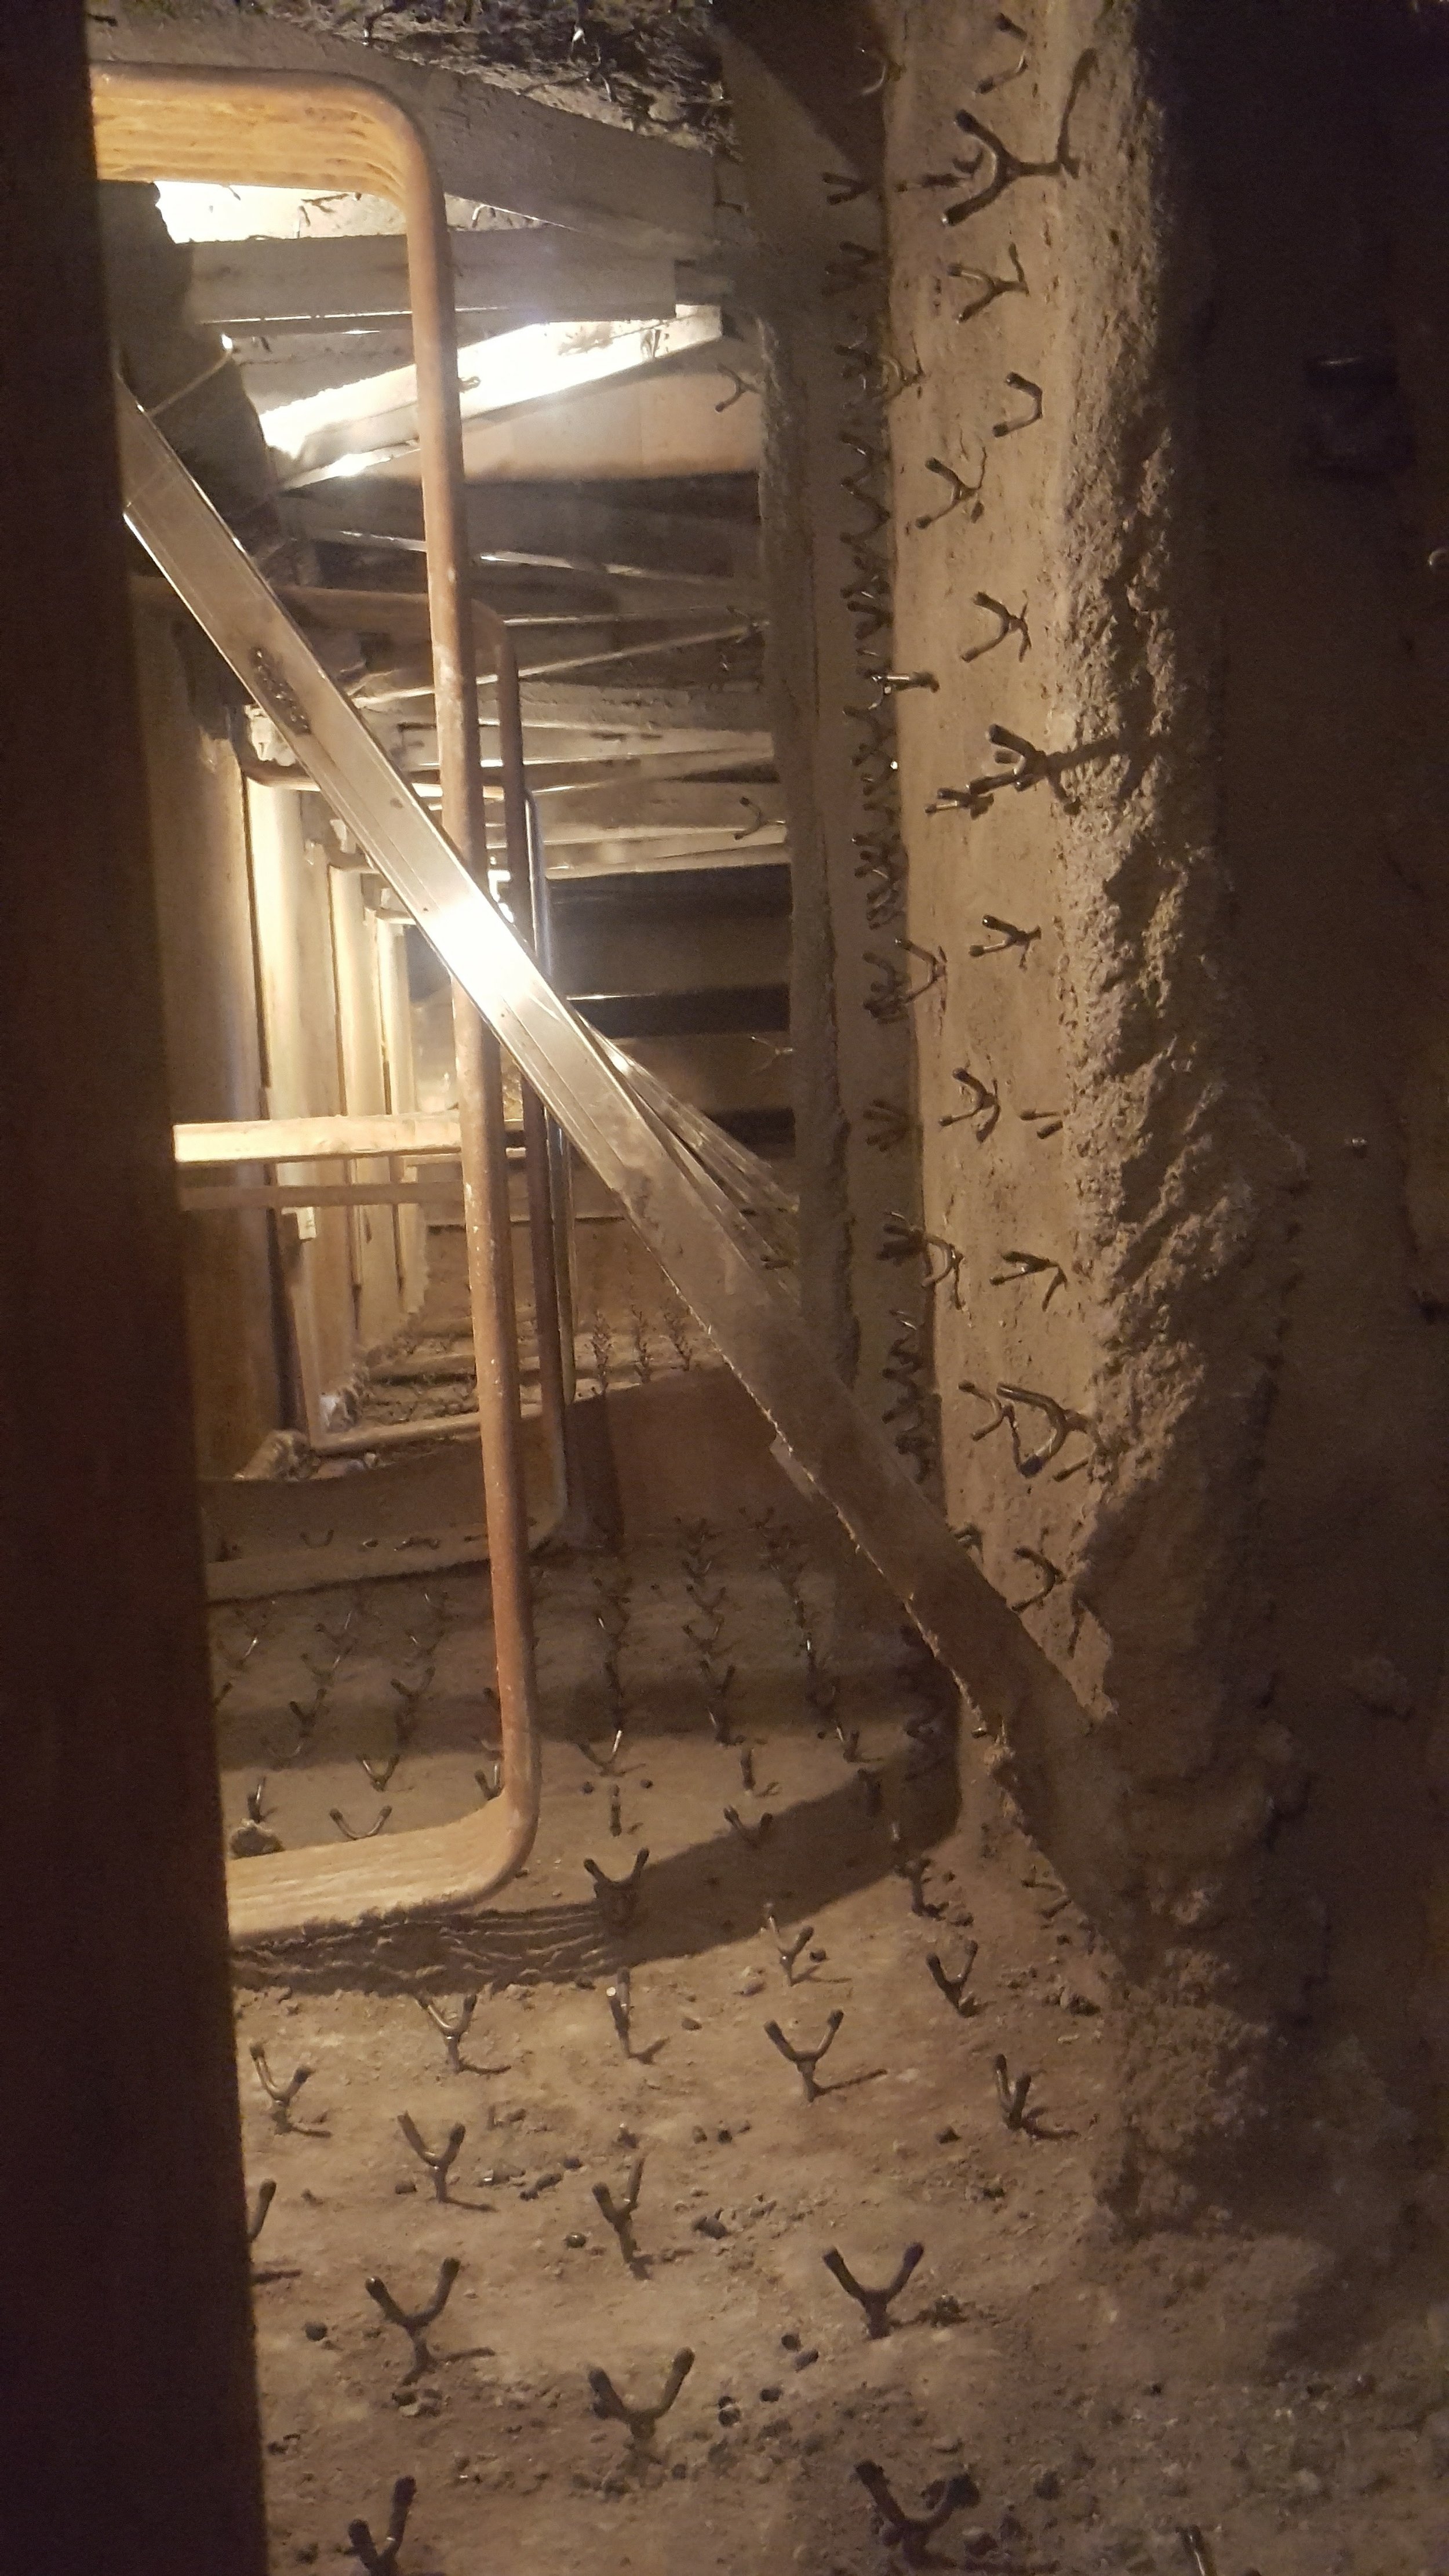 Completed Shotcrete Insulation Lining in Ductwork, Hotface to be shot over.